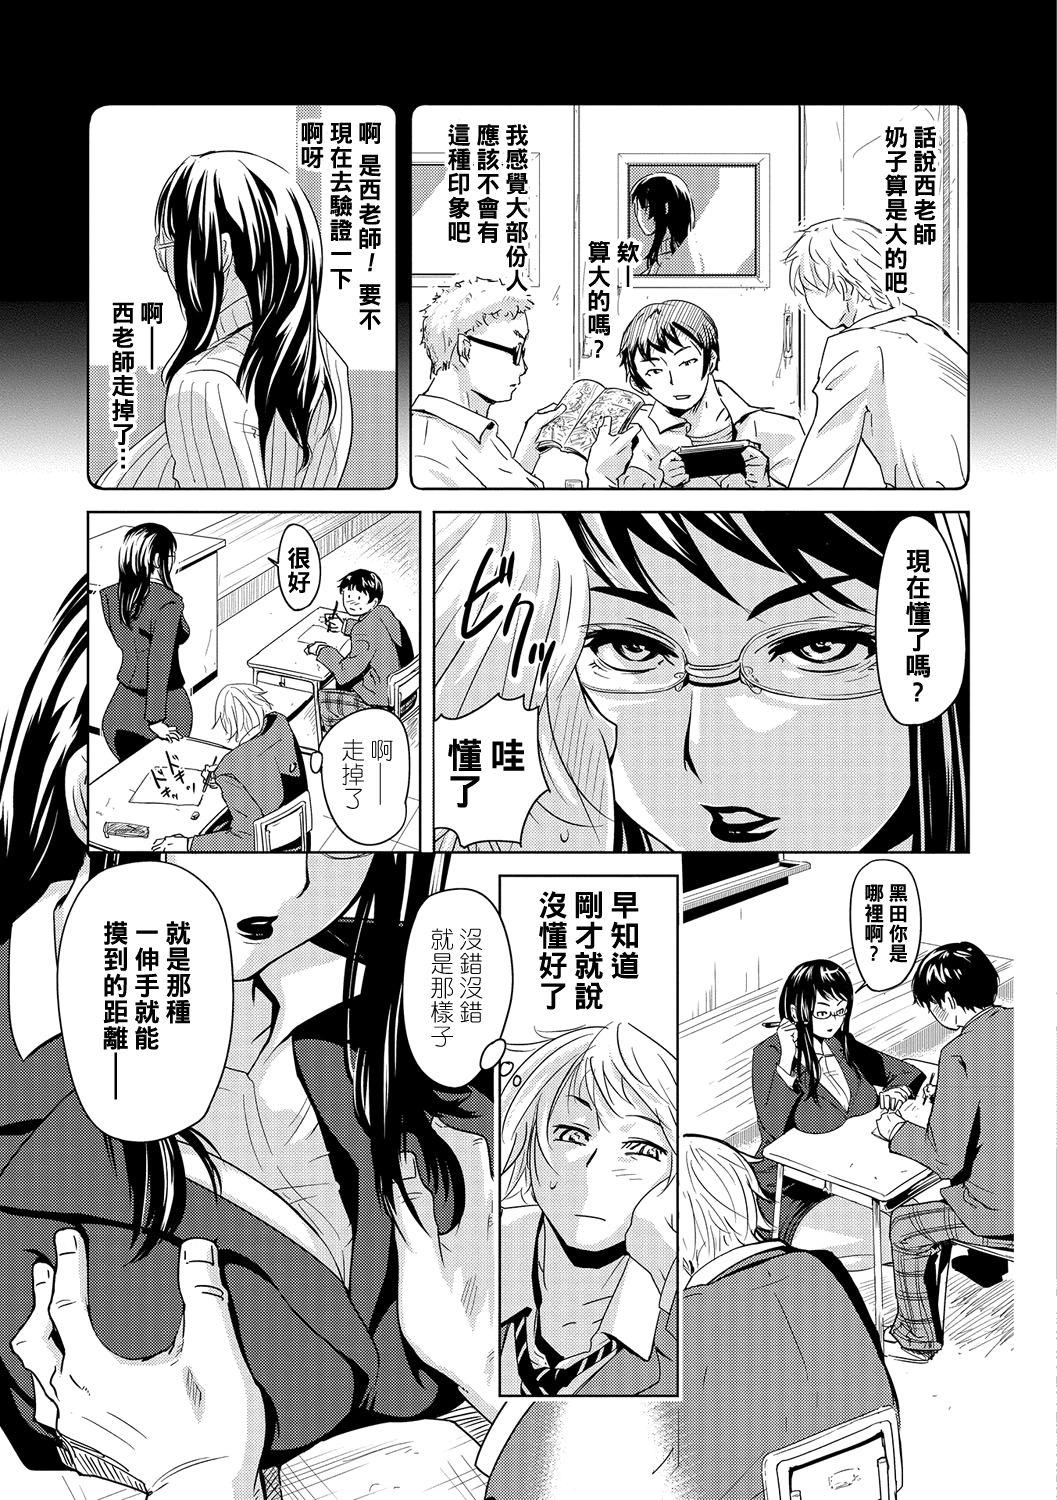 Boots 補習戦略～西彩子先生の場合～（Chinese） Scandal - Page 3